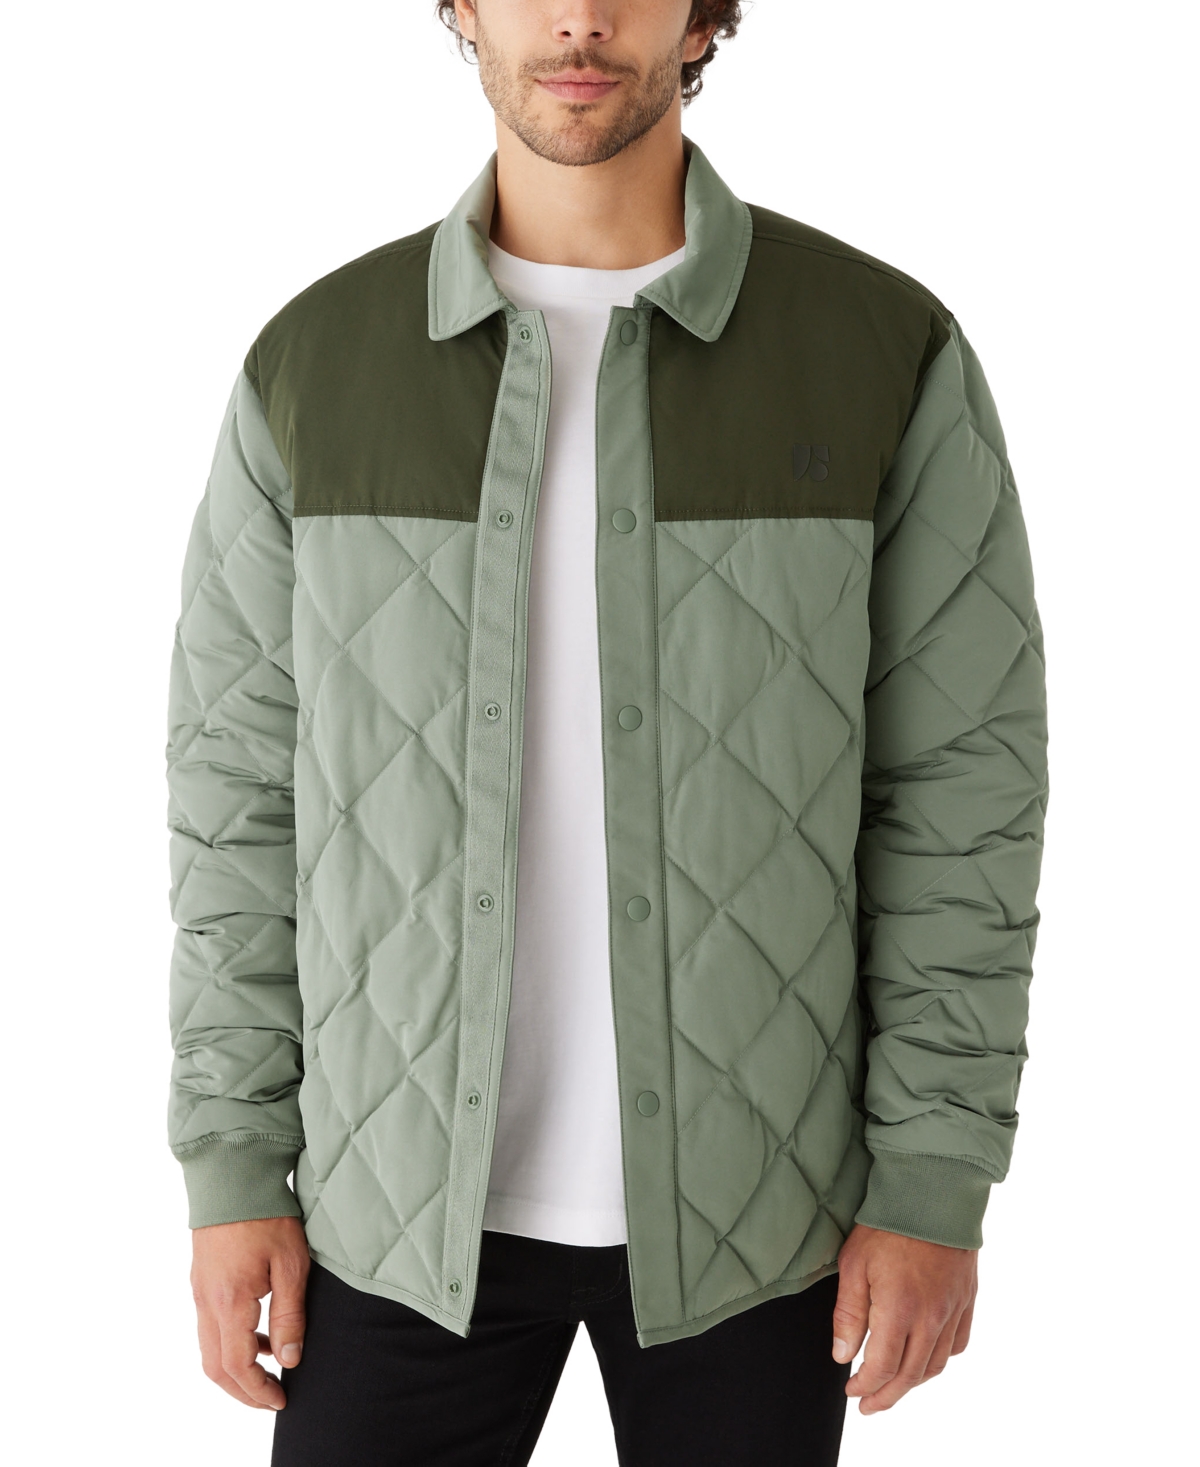 Men's Skyline Reversible Collared Weather-Resistant Snap-Front Jacket - Agave Green